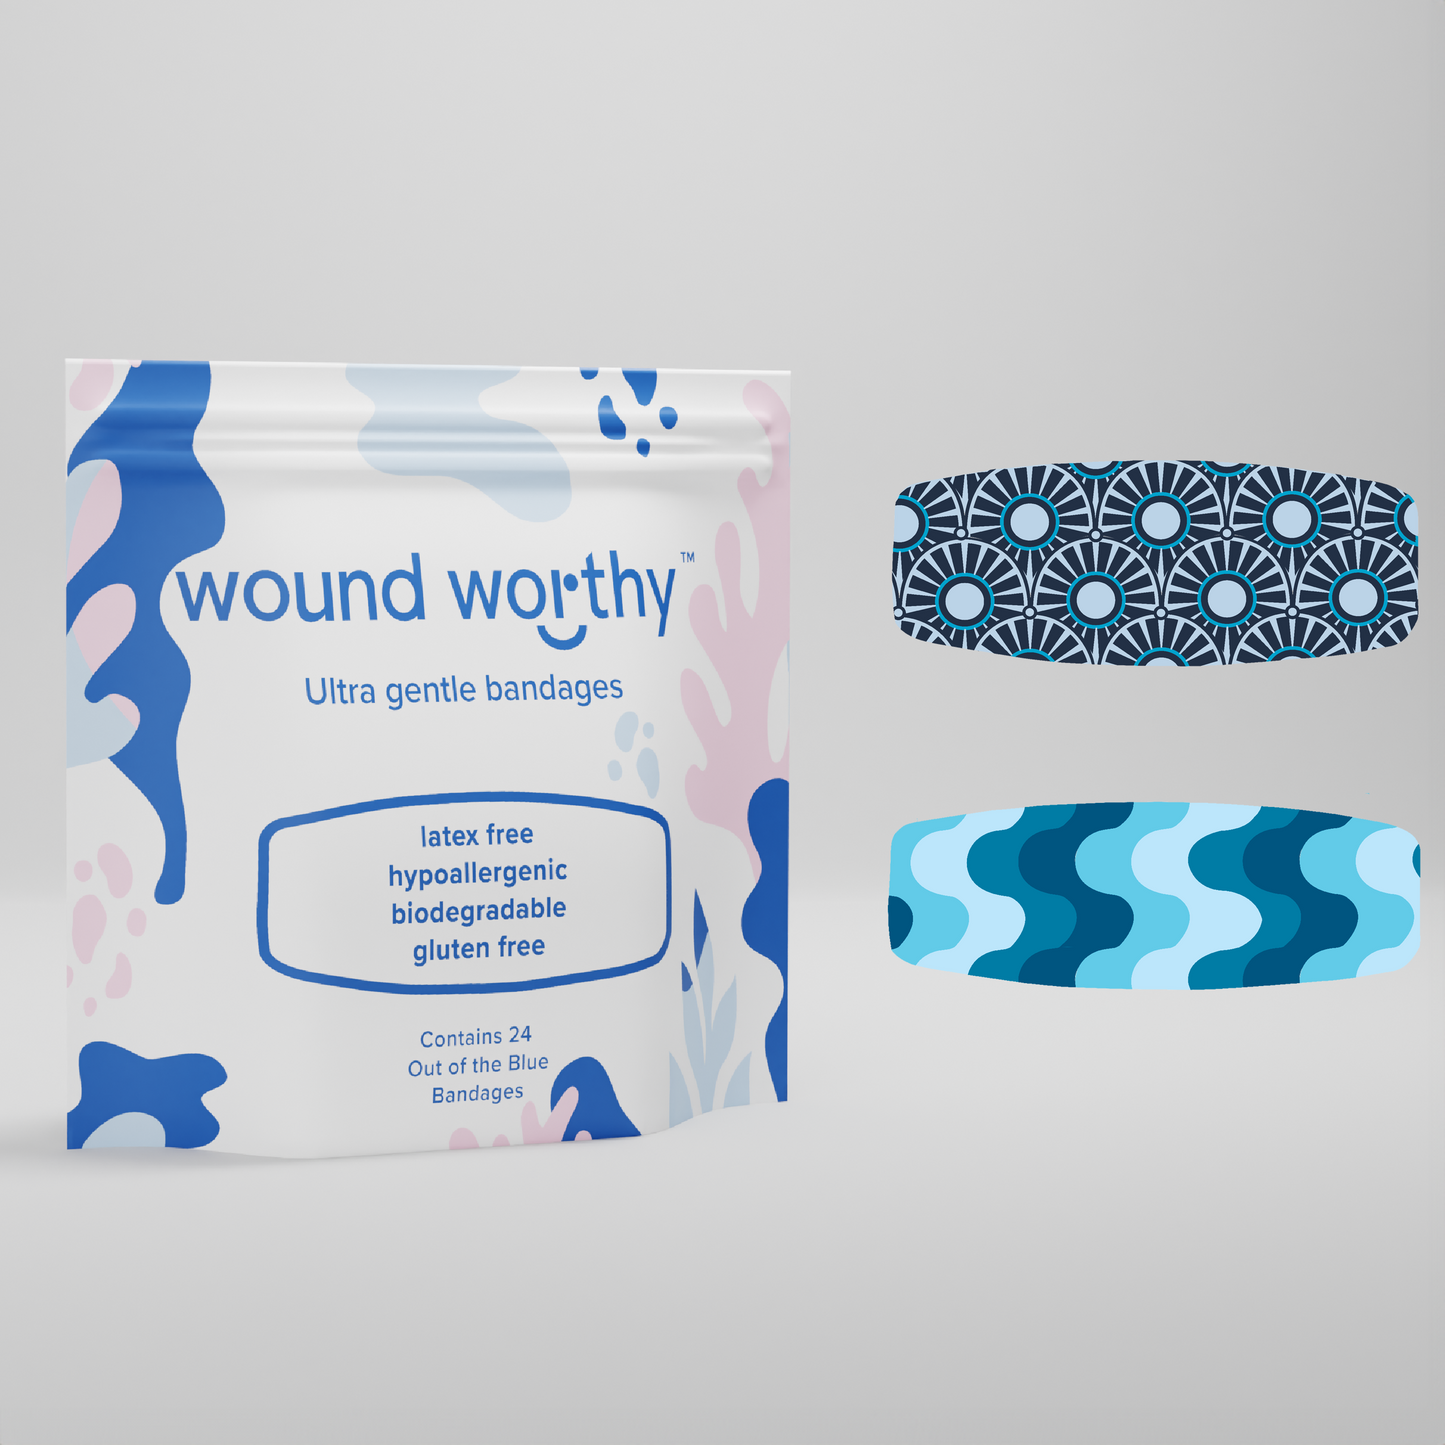 Out of the Blue - Wound Worthy Ultra Gentle Bandages